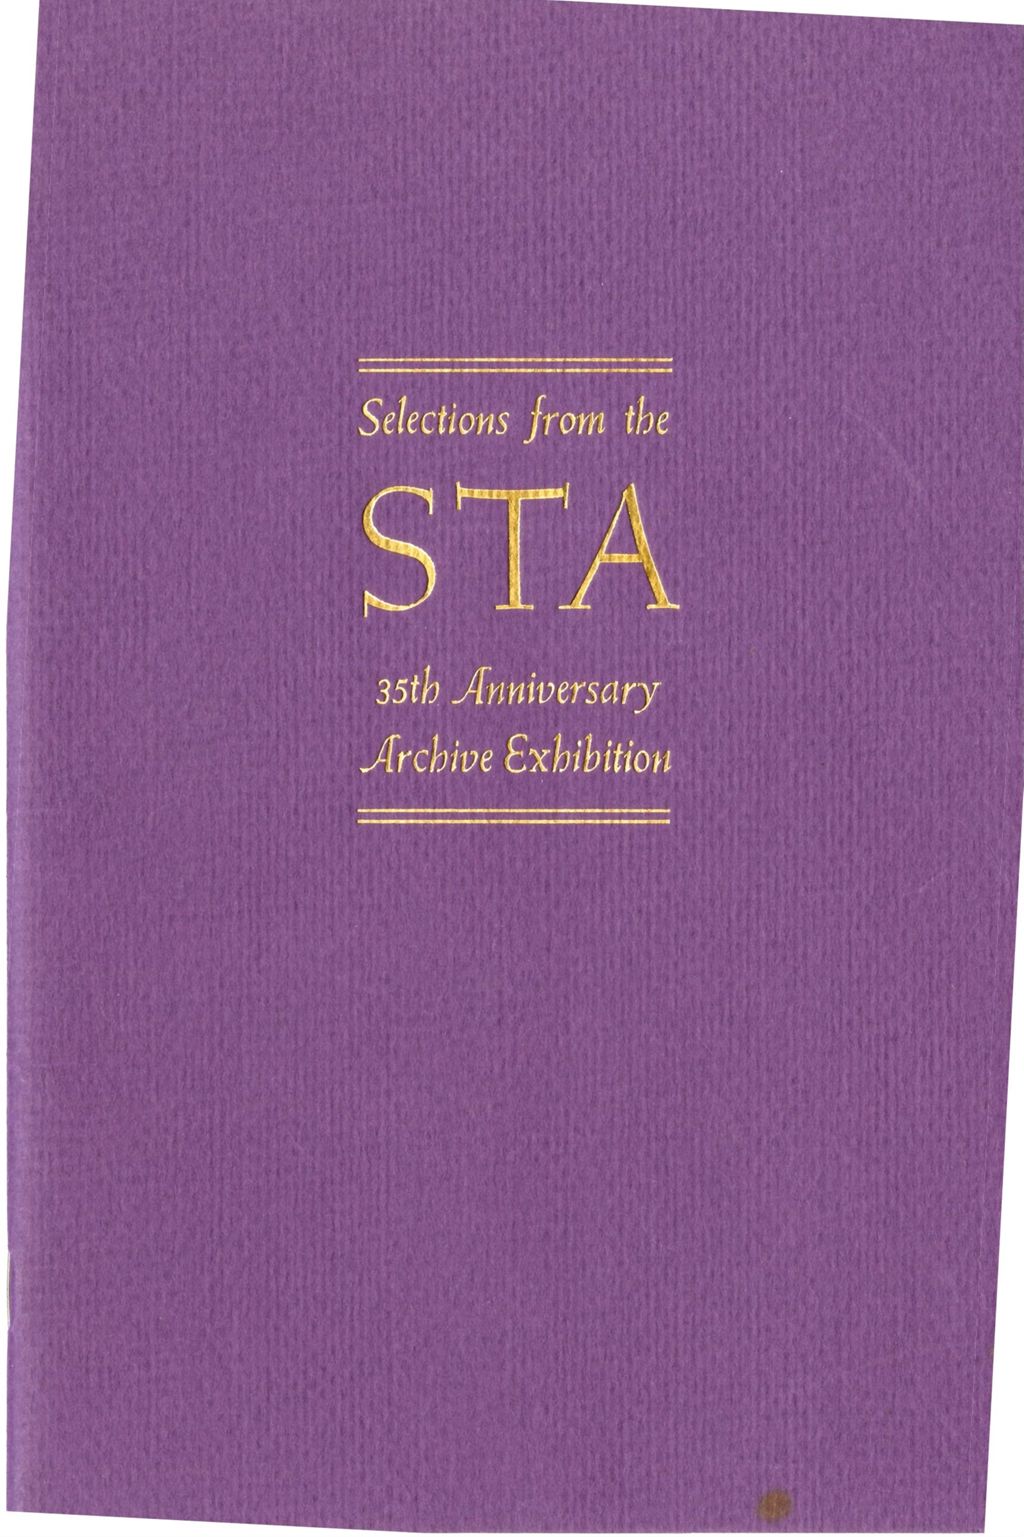 Miniature of Selections from the STA 35th Anniversary Archive Exhibition